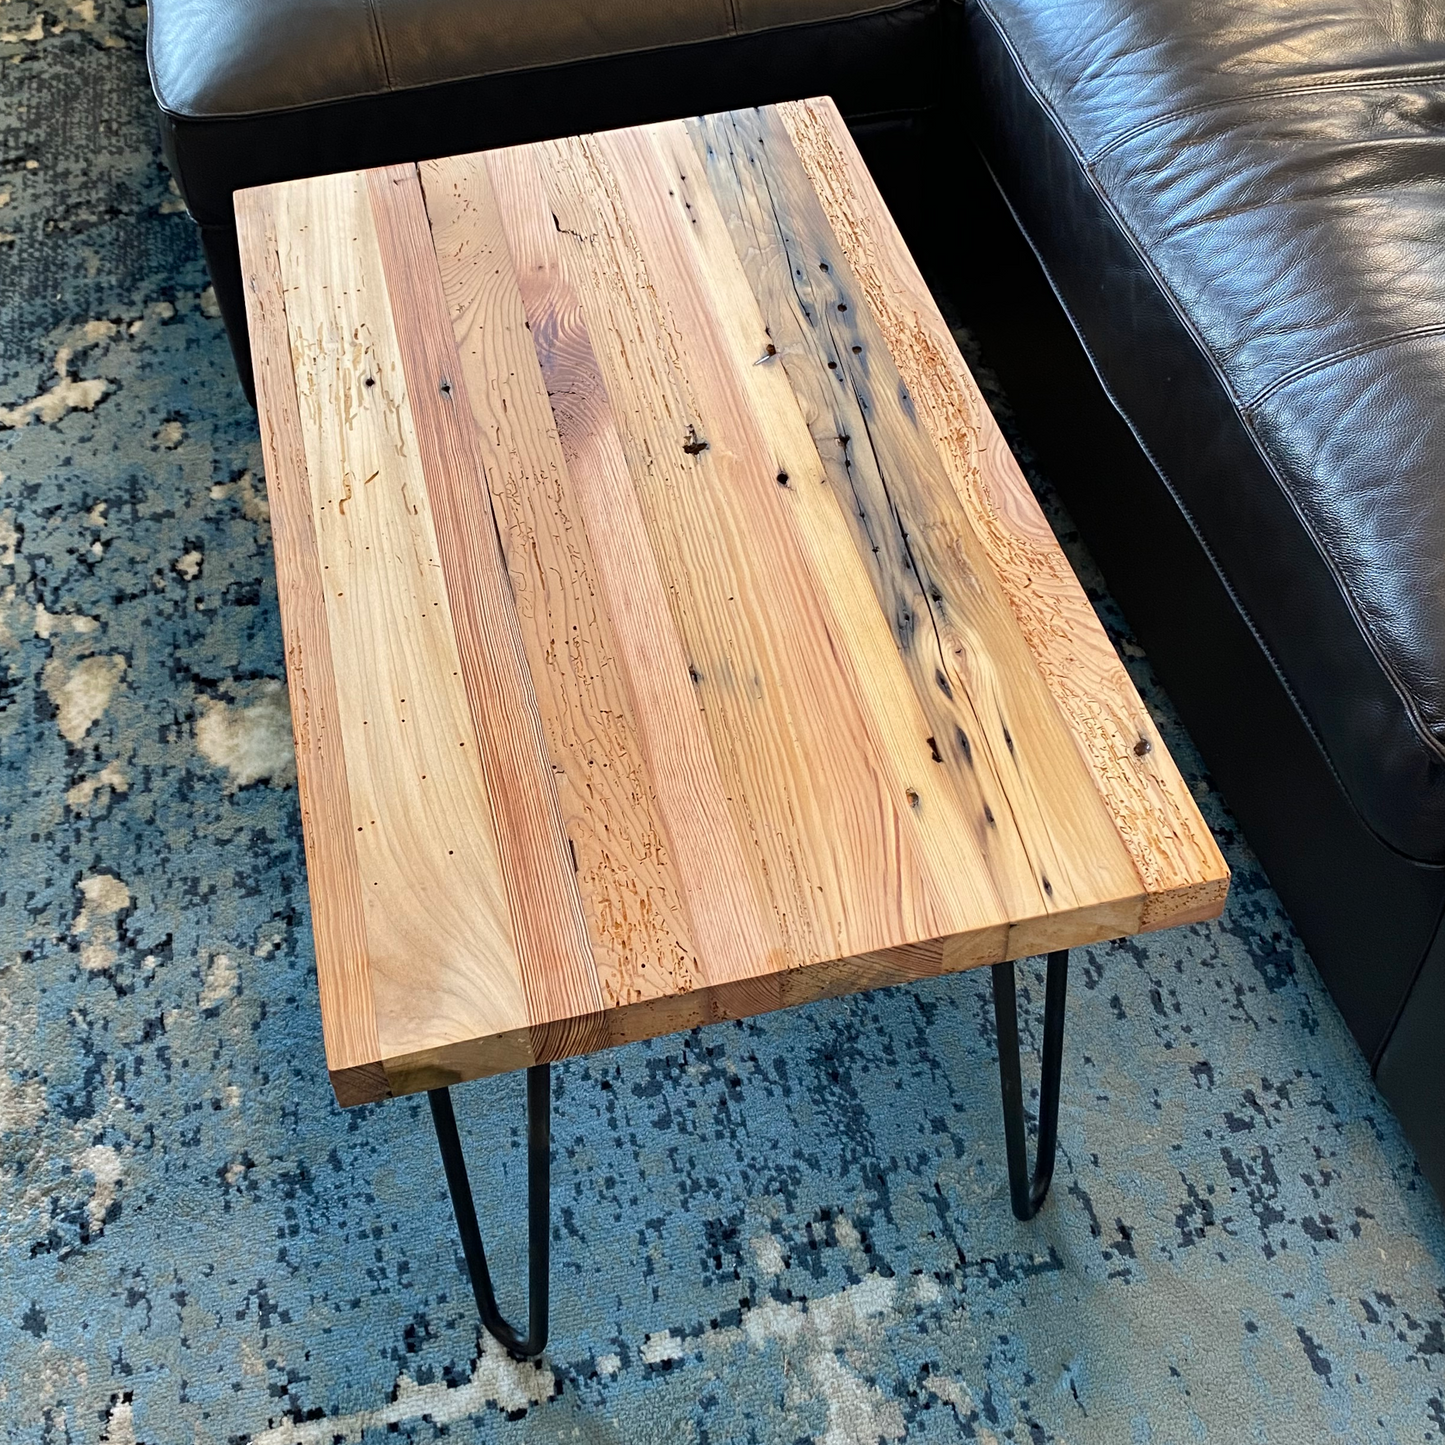 A reclaimed wood coffee table with hair pin legs. The top down view shows variations in the wood and rustic characteristics. The lacquer finish shown adds a slight shine.